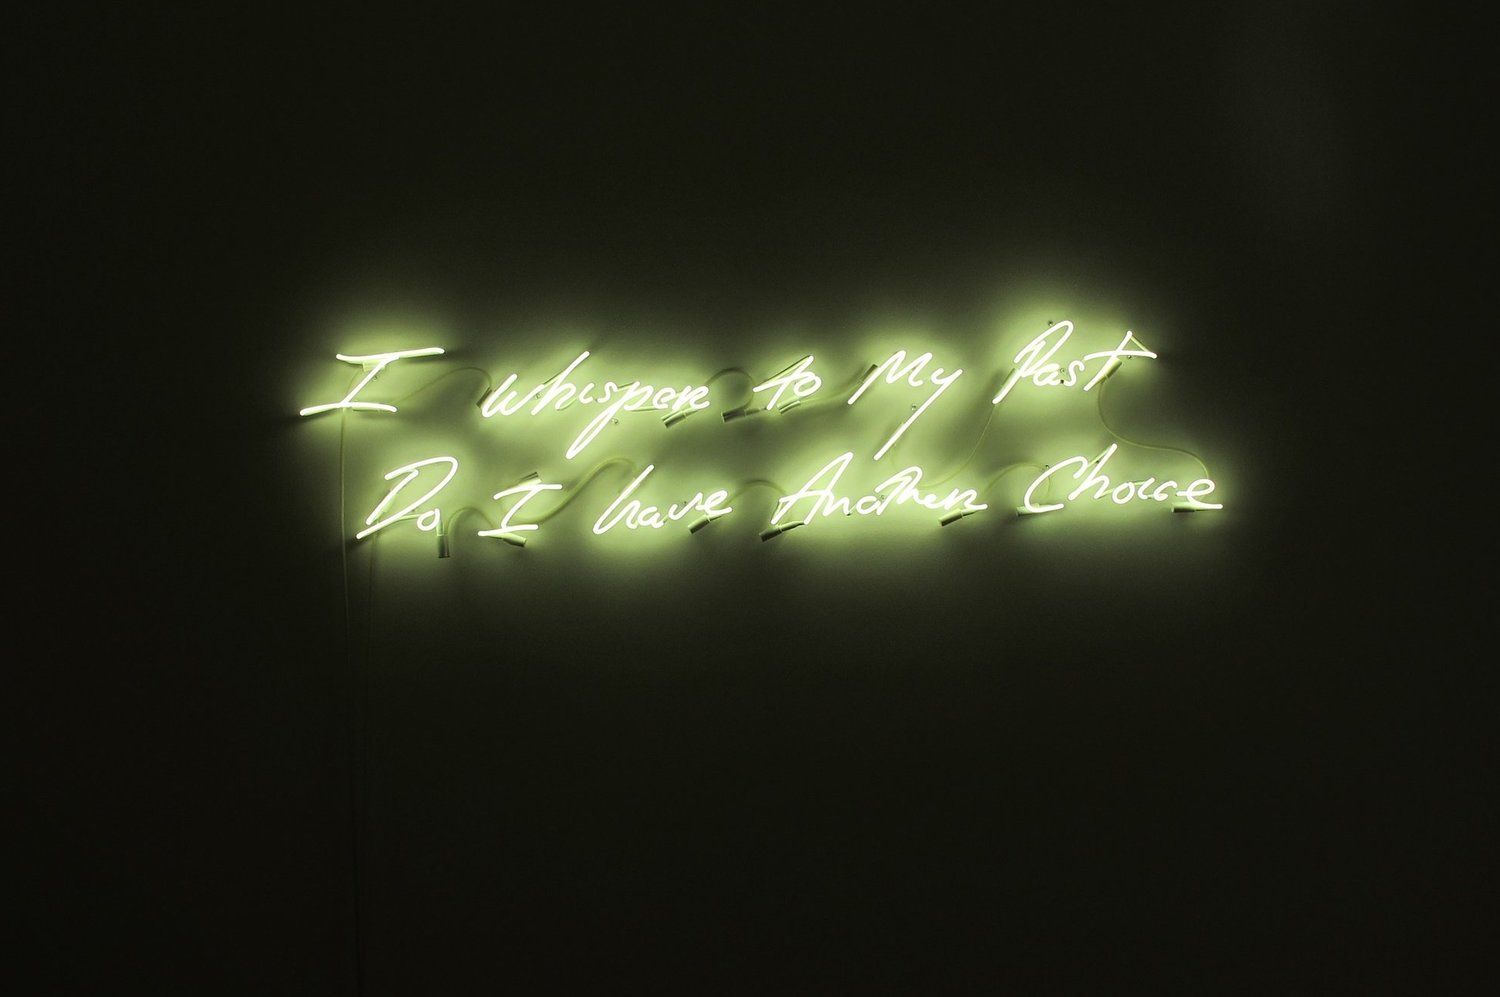 Tracey Emin I Whisper to My Past Do I have Another Choice 2010